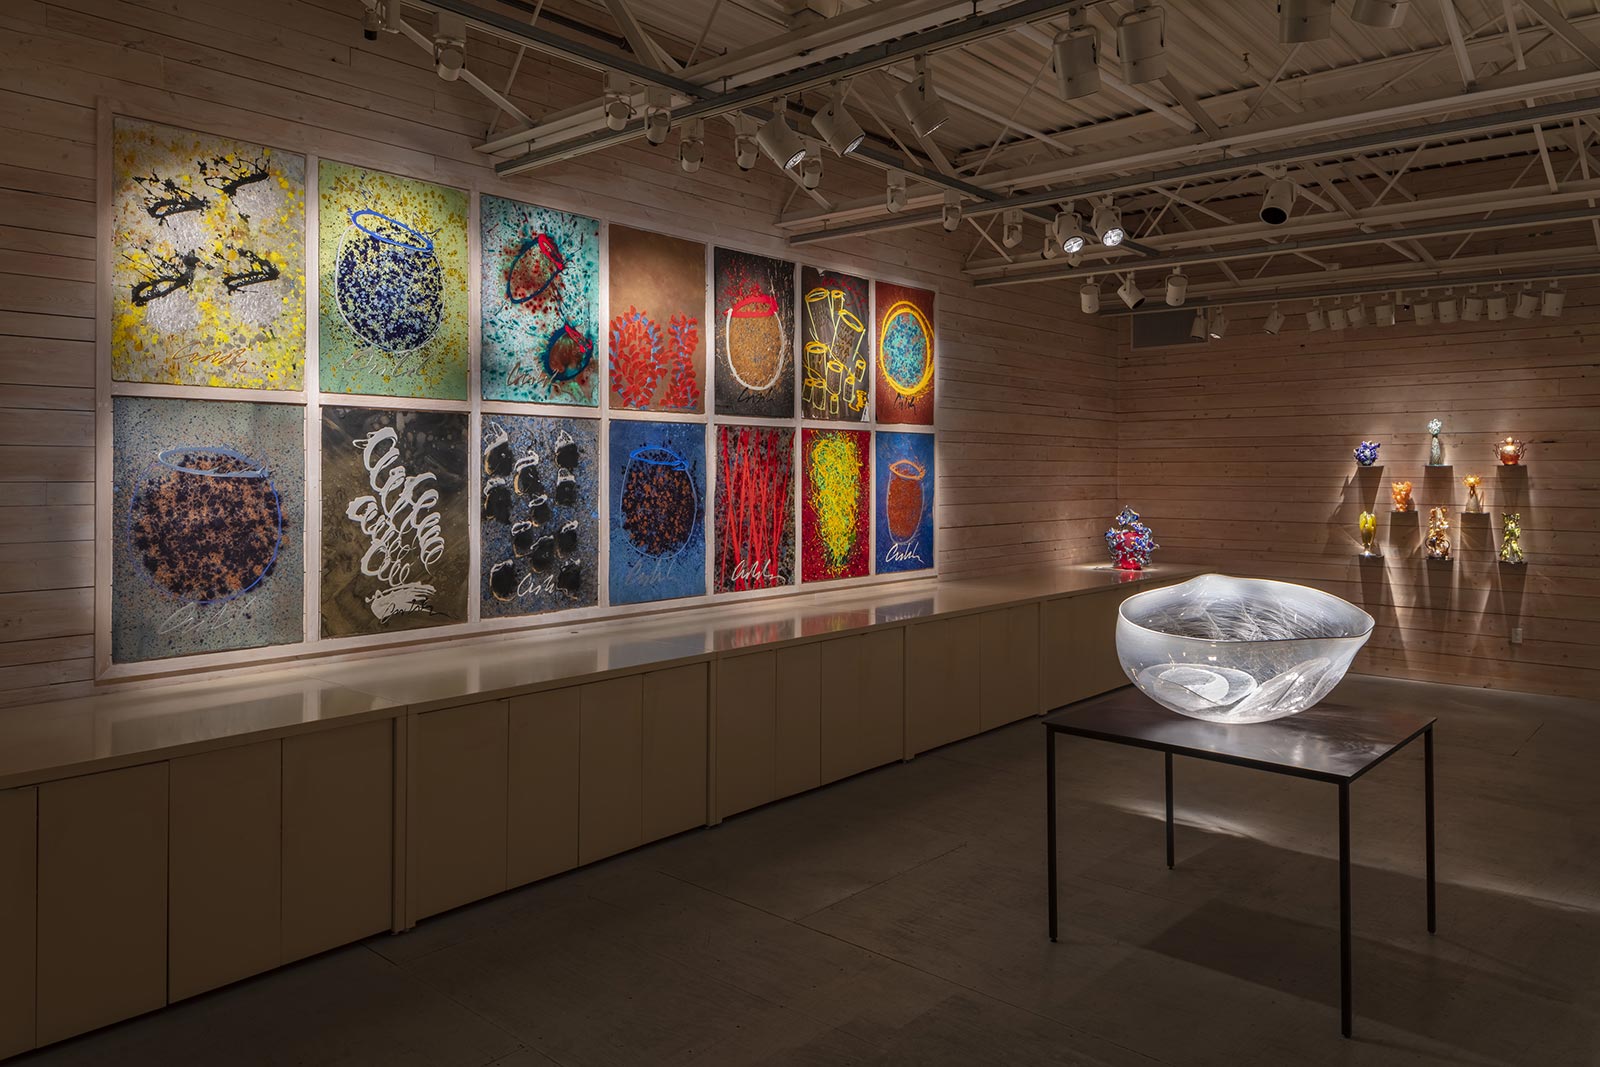 Gallery at Chihuly Studio